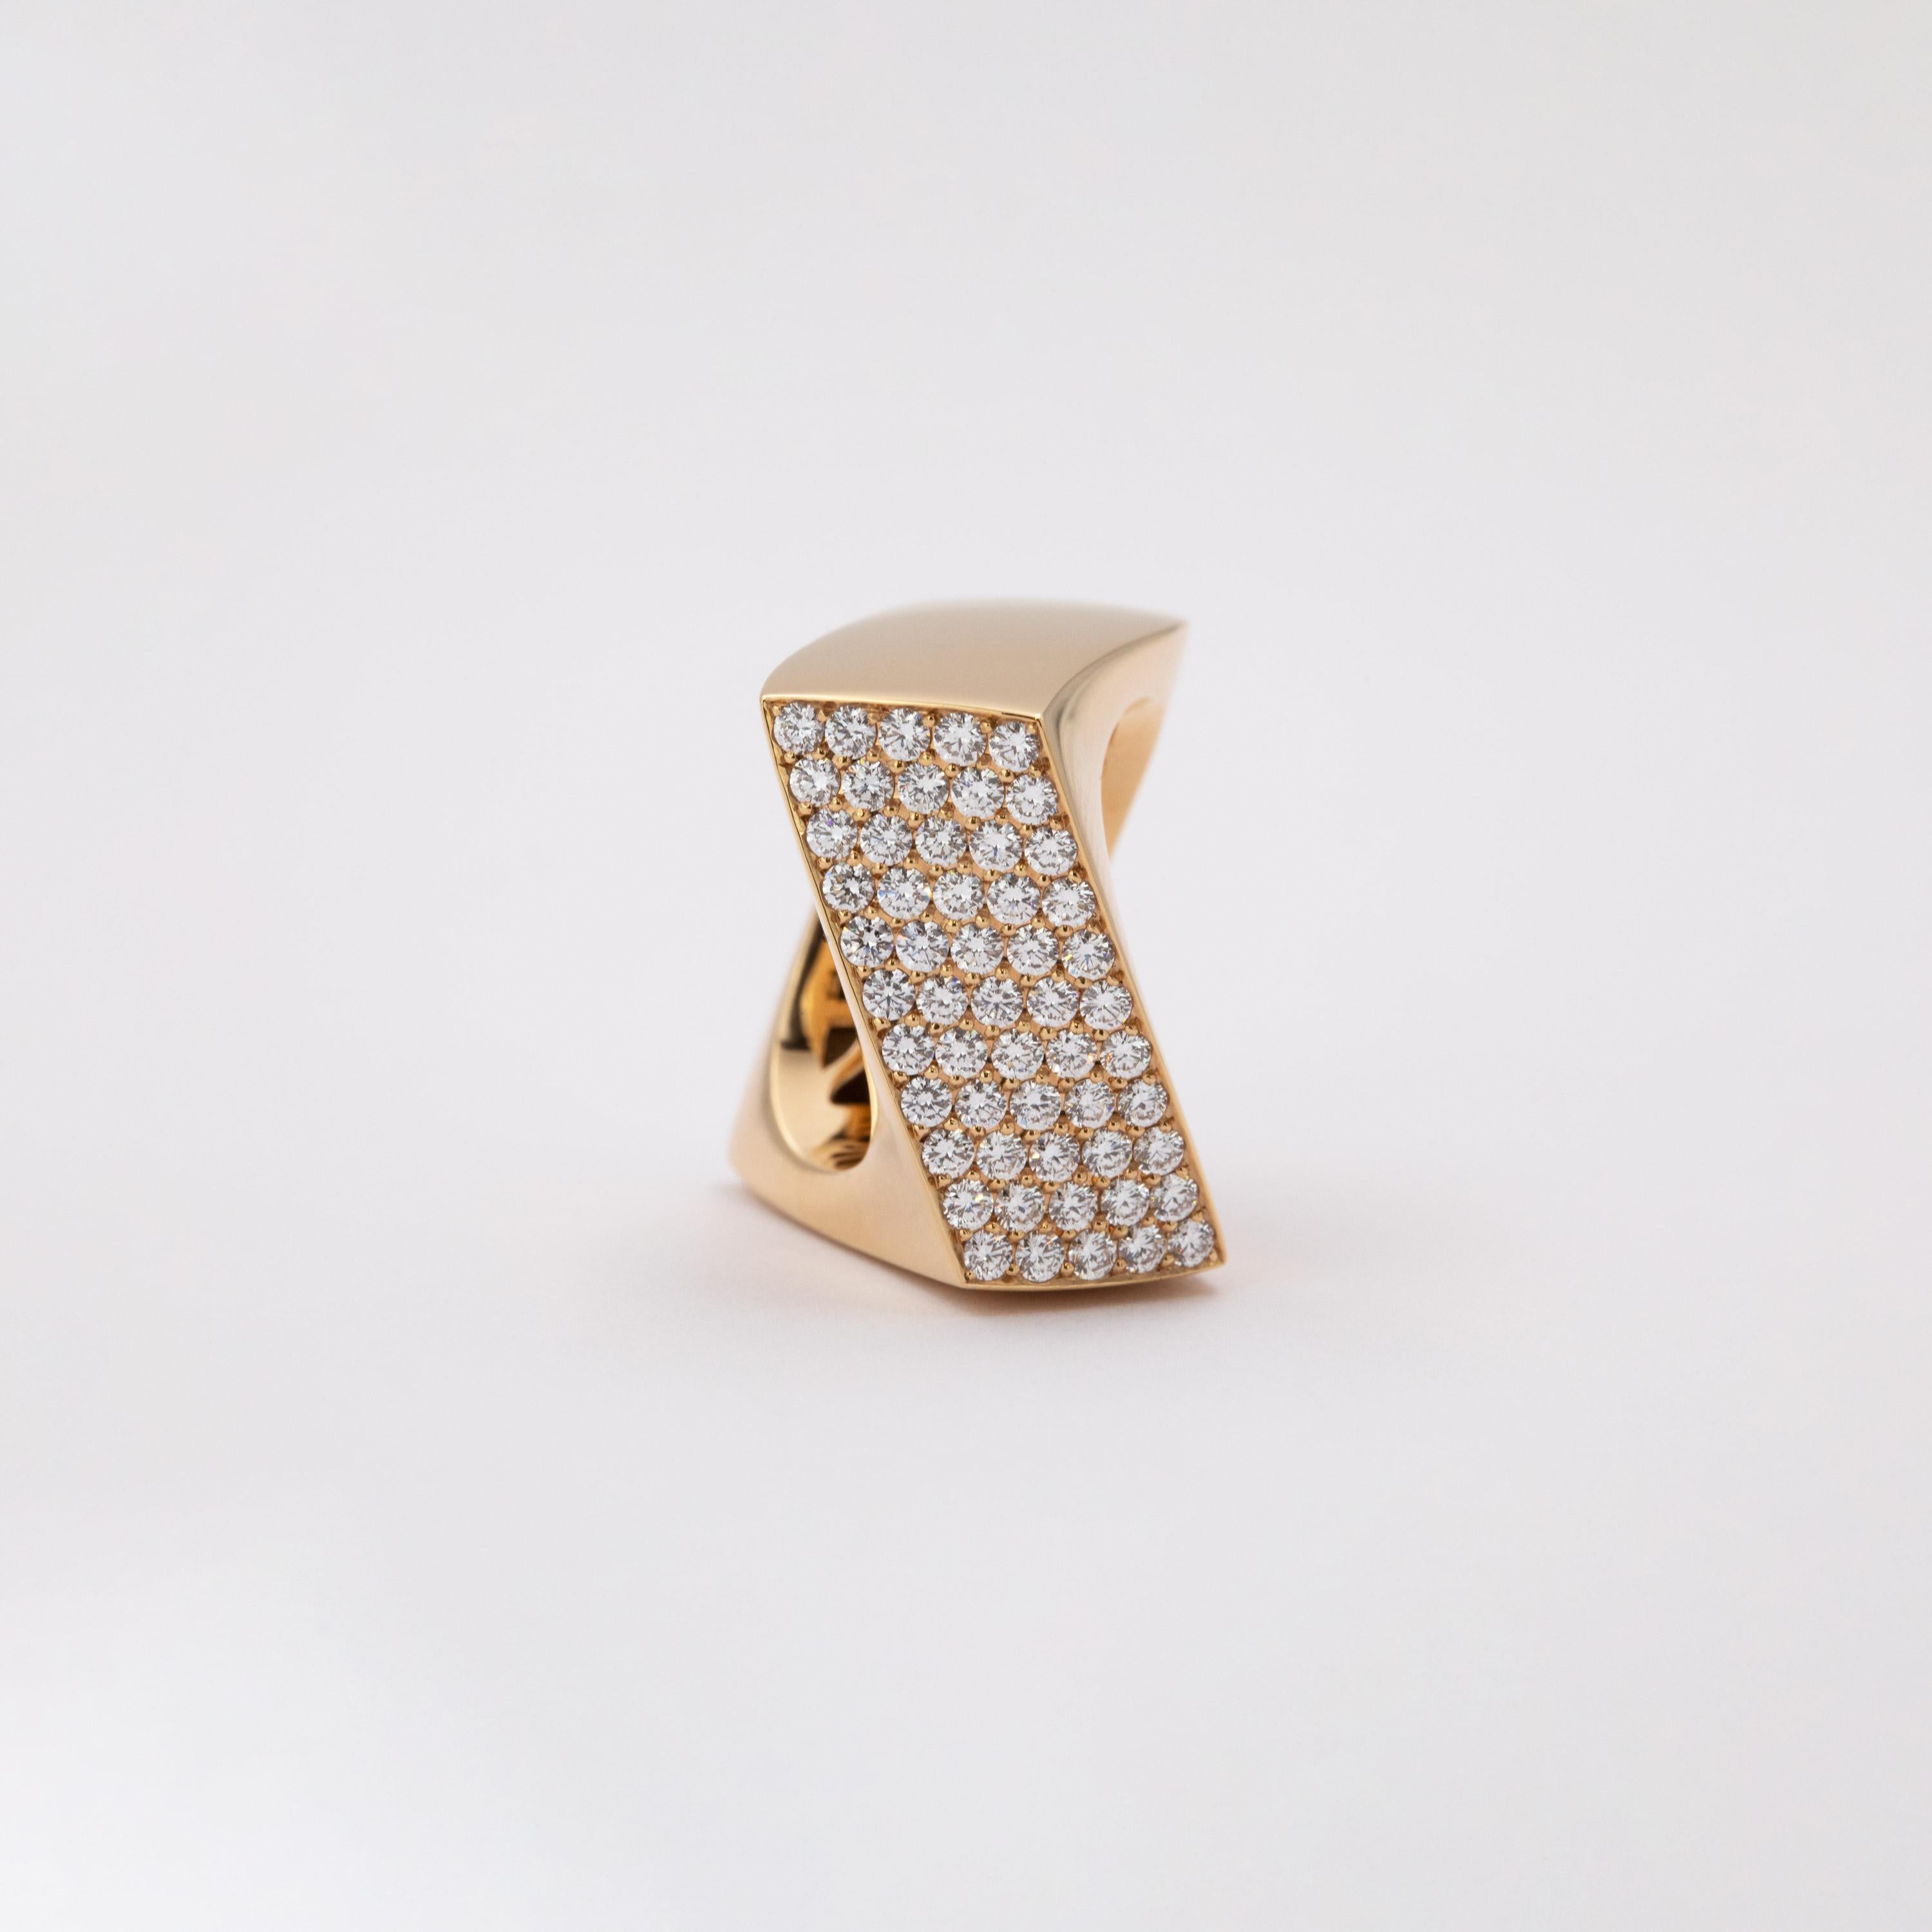 This sophisticated and clean design displays the diamonds in a refreshing new way. The cubic shank form is strongly twisted, resulting in a dynamic shape. With its bent form, the diamond-encrusted surface of the ring luxuriously presents an array of